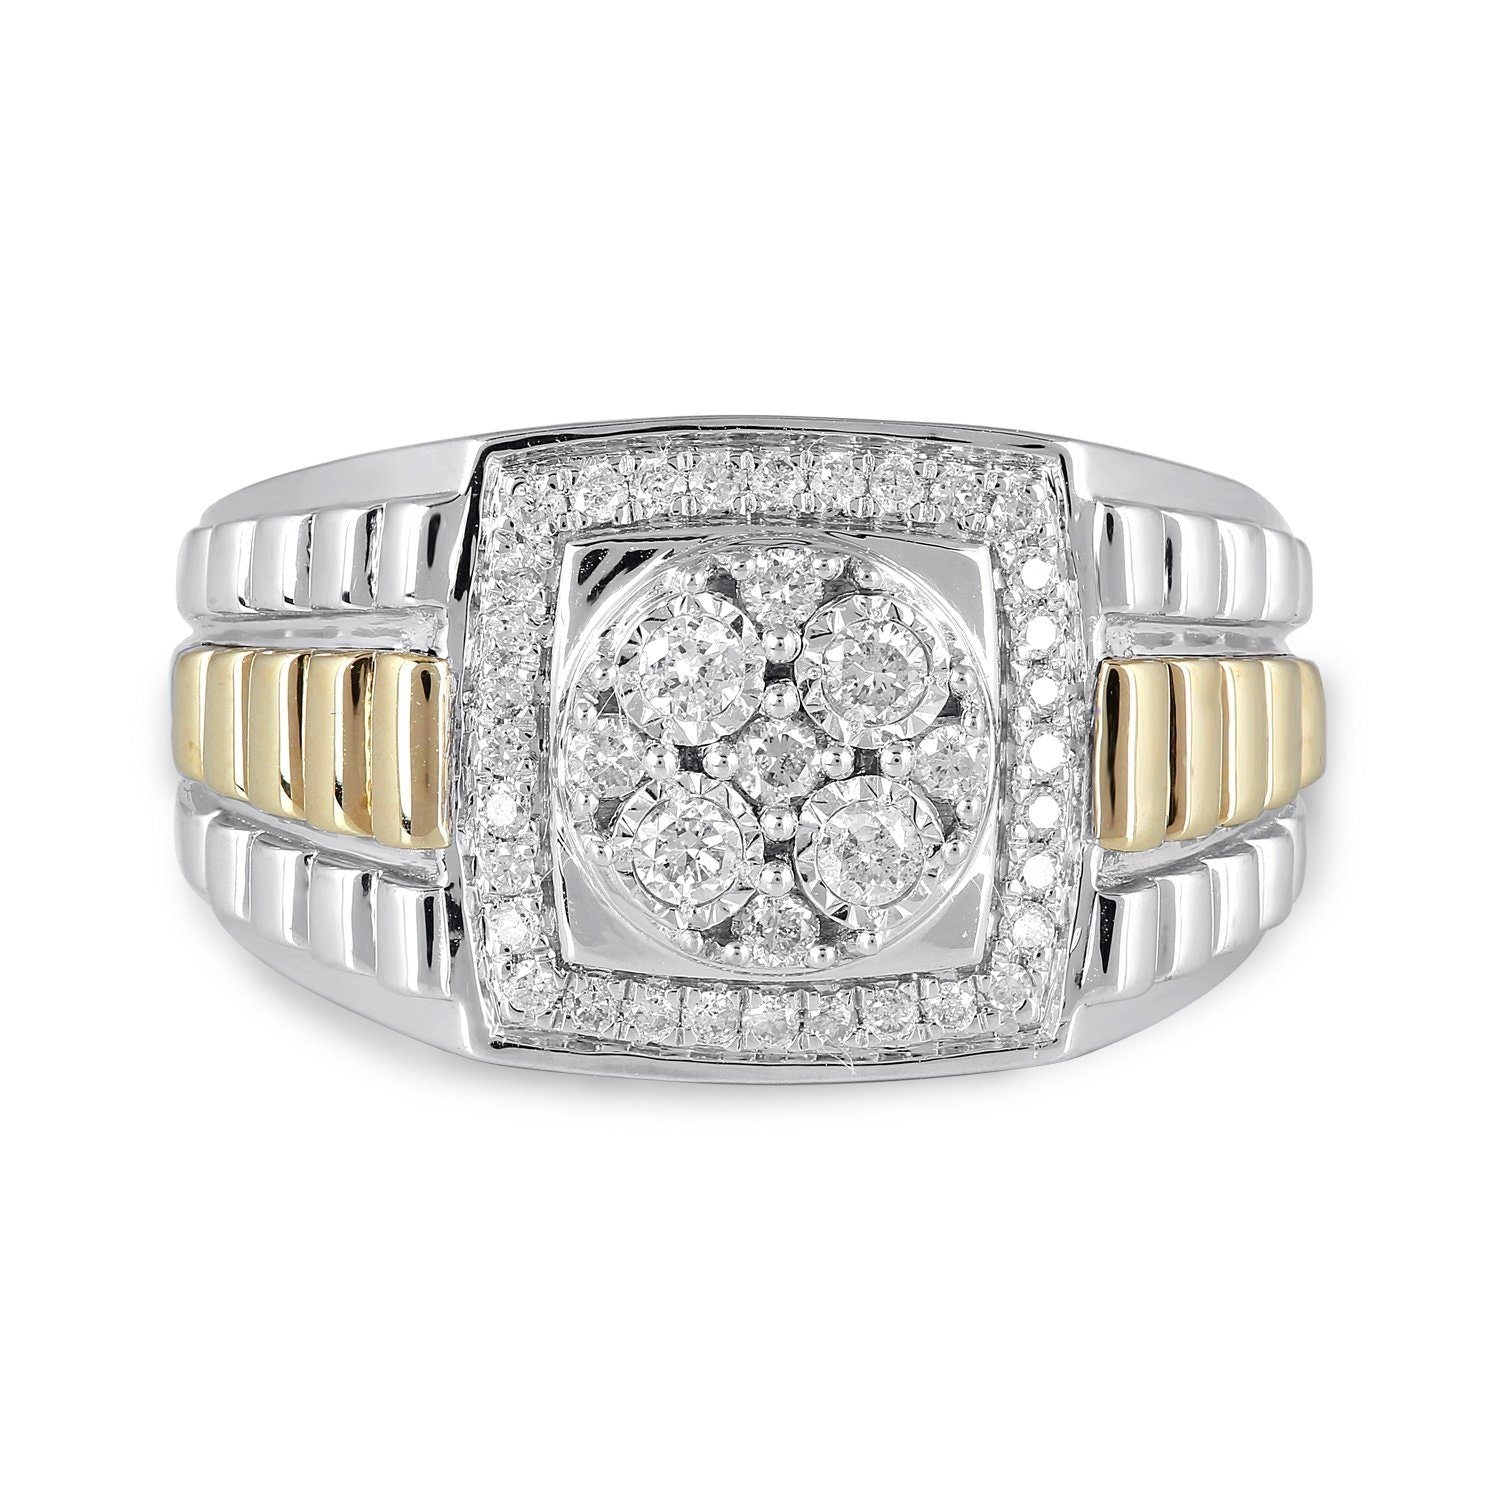 Rolex Look Shoulder Ring with 1/2ct of Diamonds in 9ct Yellow Gold and Sterling Silver Rings Bevilles 